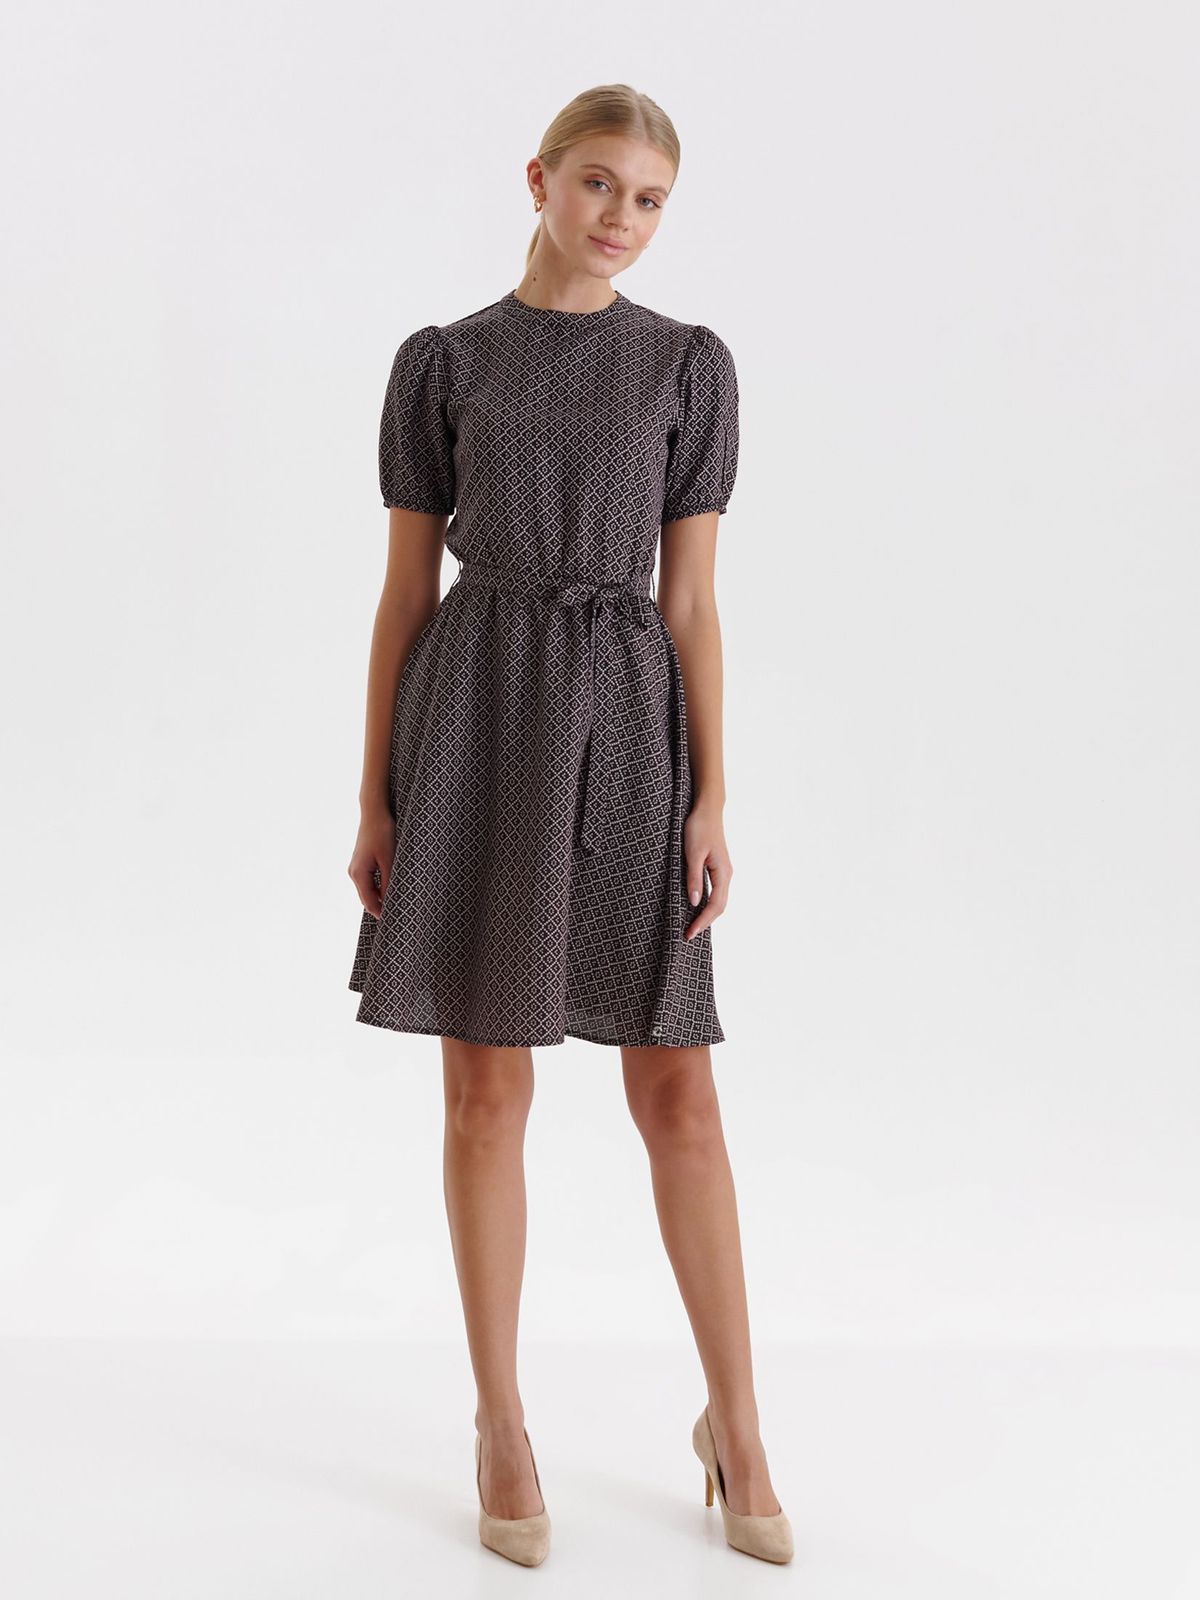 Black dress thin fabric short cut loose fit accessorized with tied waistband with puffed sleeves